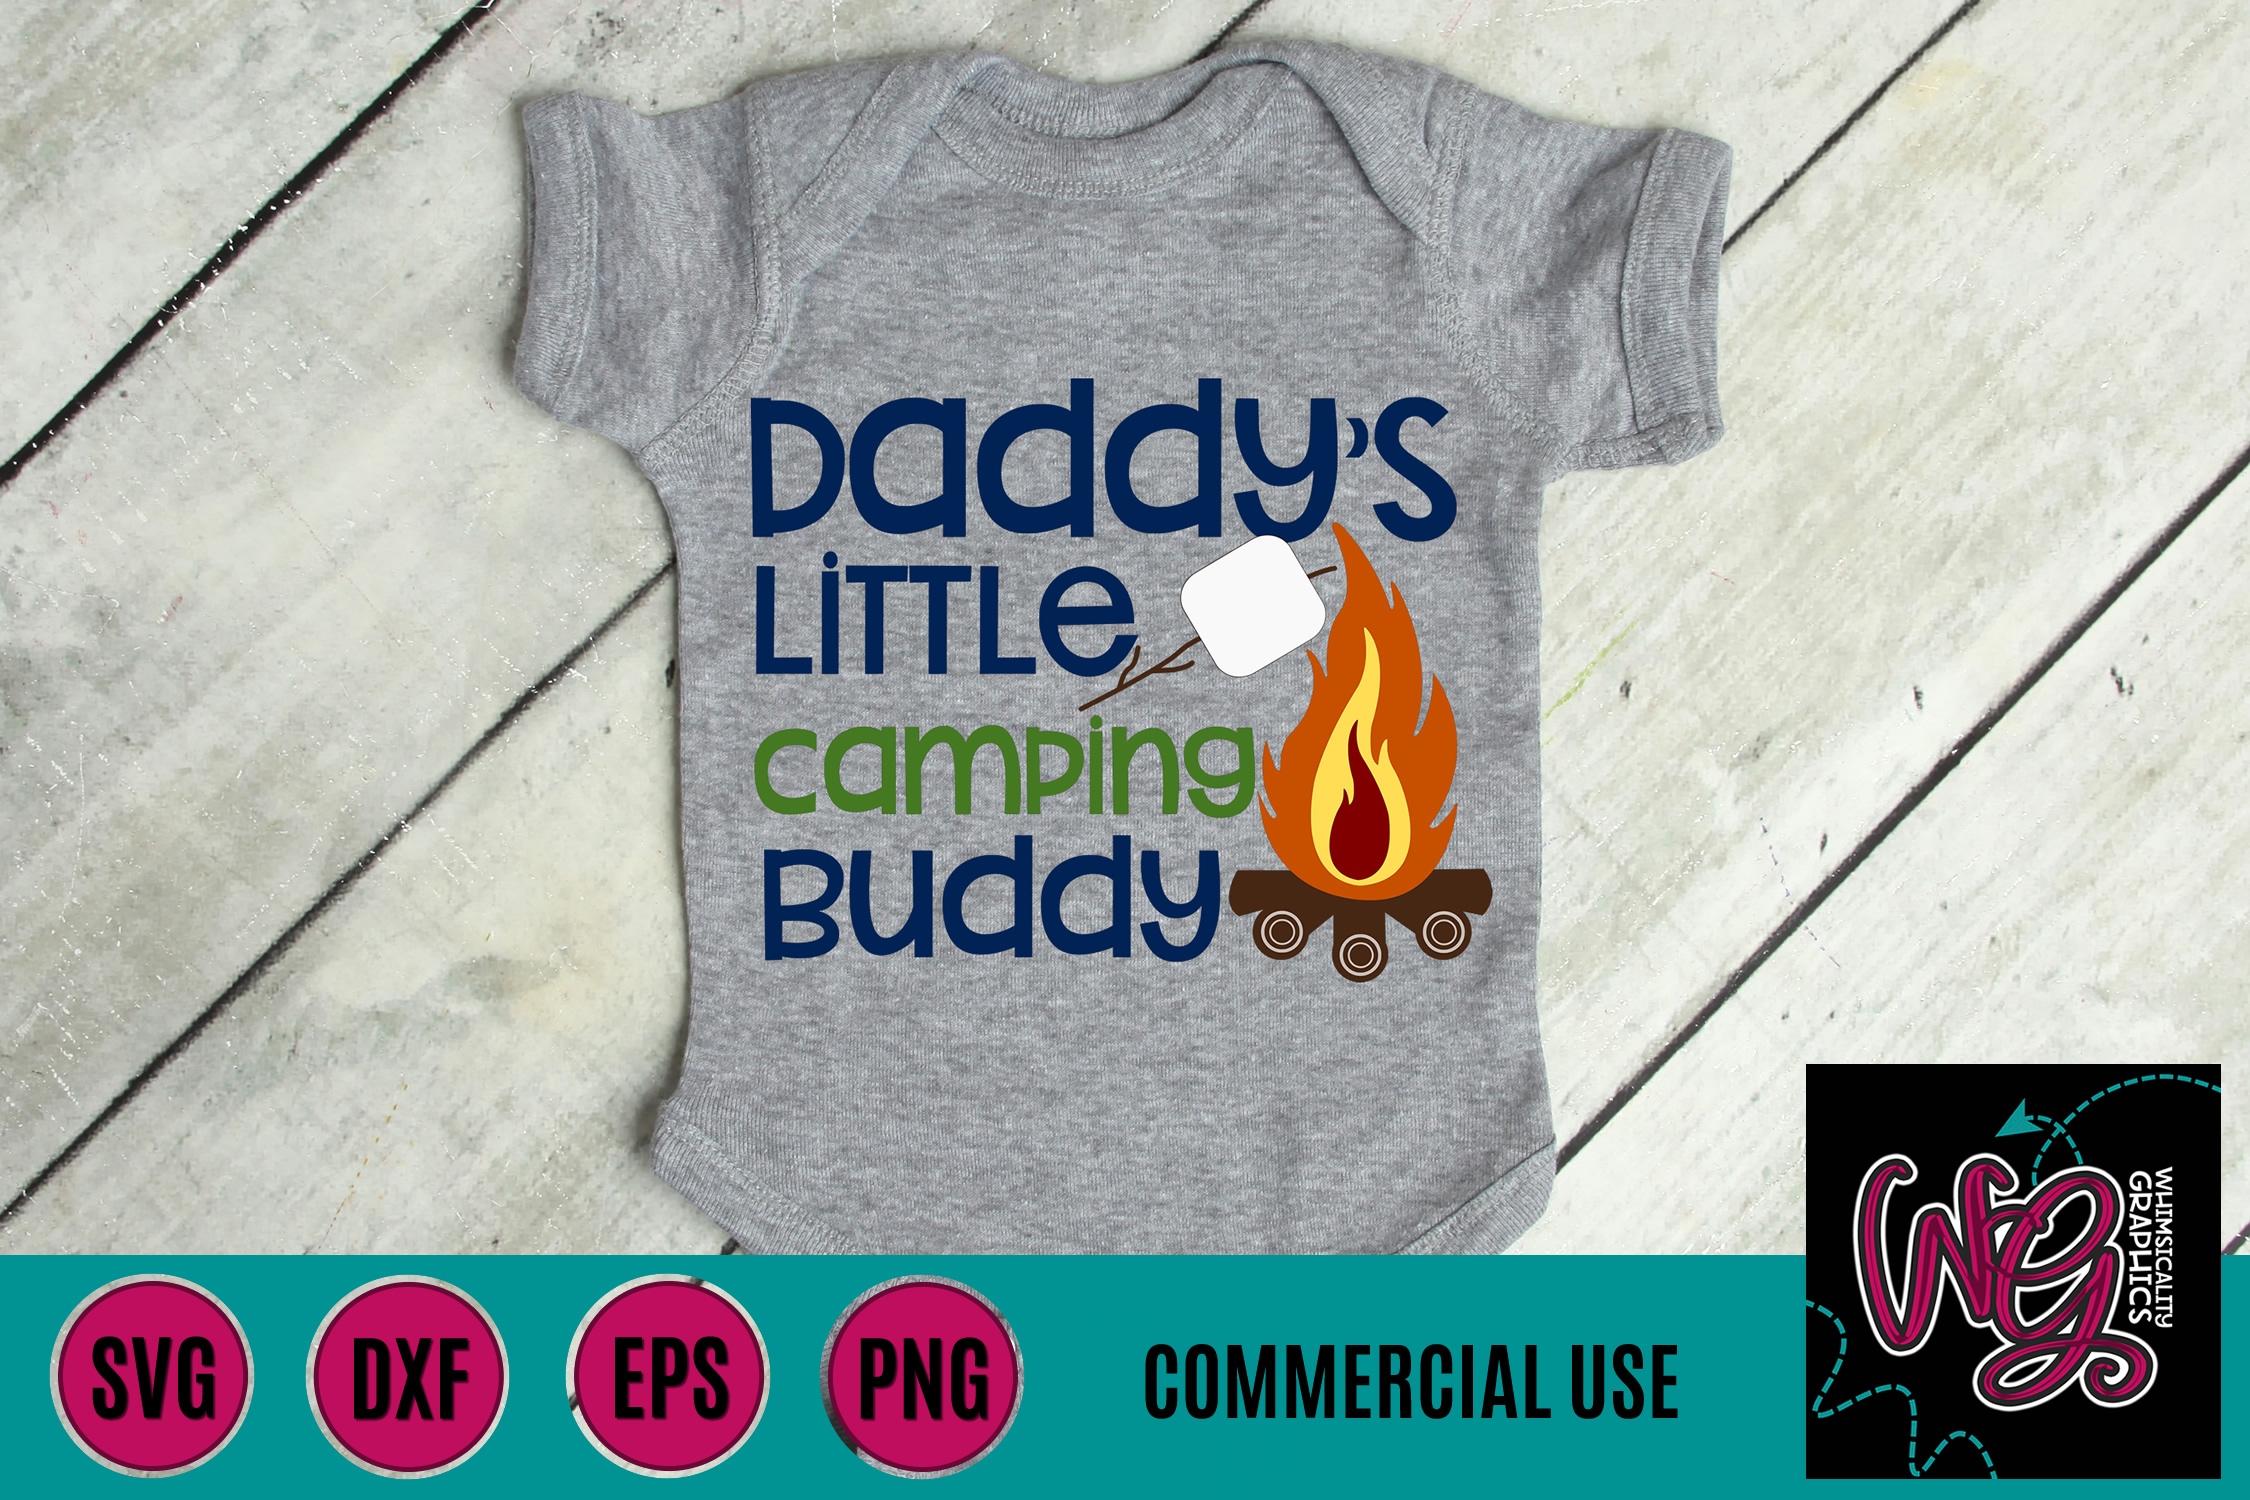 Download Daddy's Little Camping Buddy SVG, DXF, PNG, EPS Comm